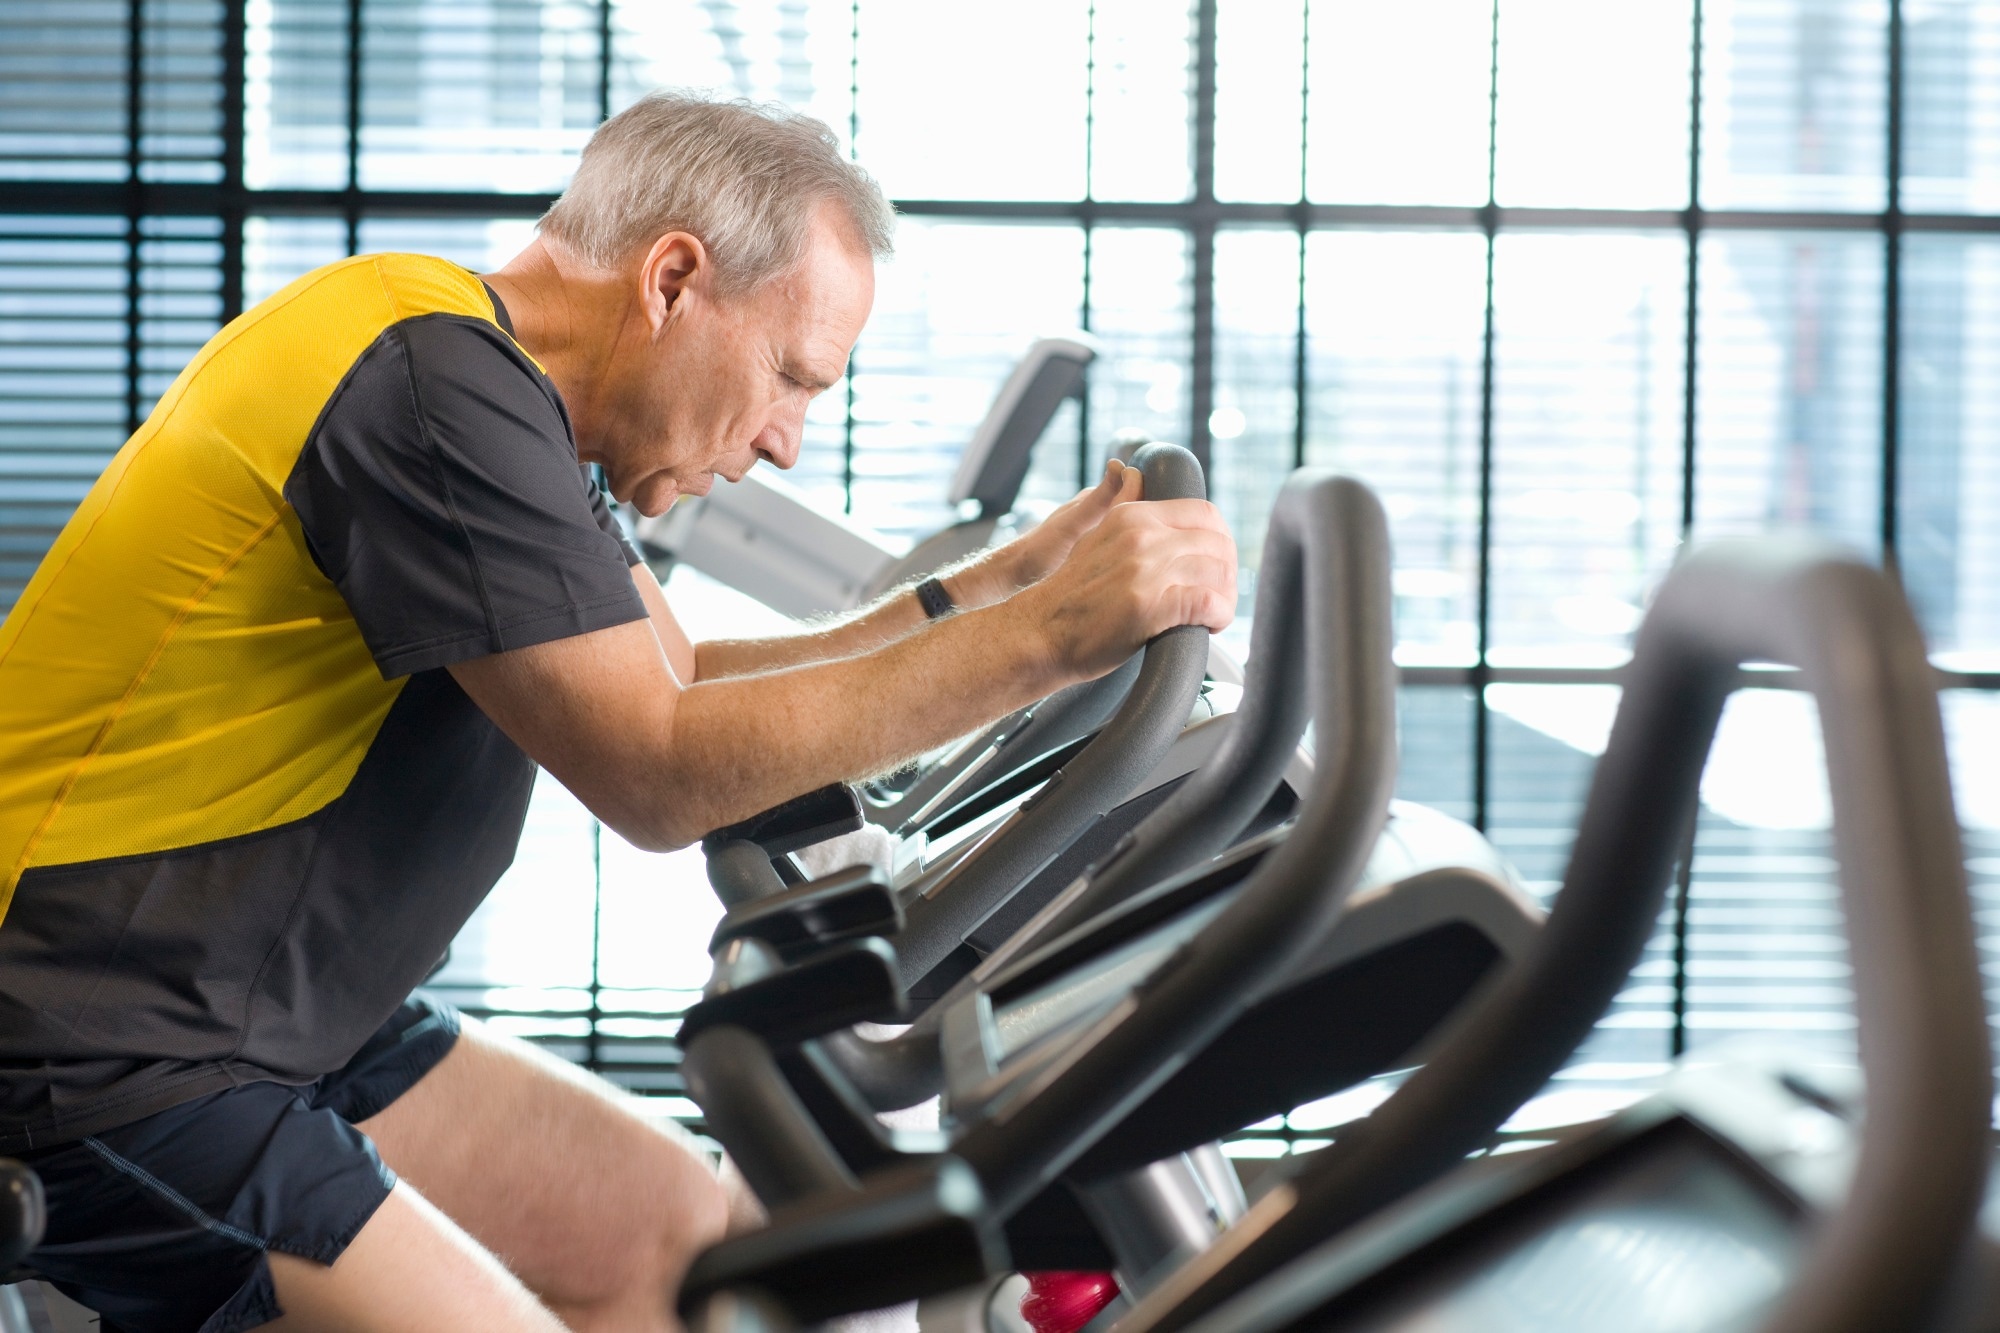 Study: High-intensity acute exercise impacts motor learning in healthy older adults. Image Credit: Air Images / Shutterstock